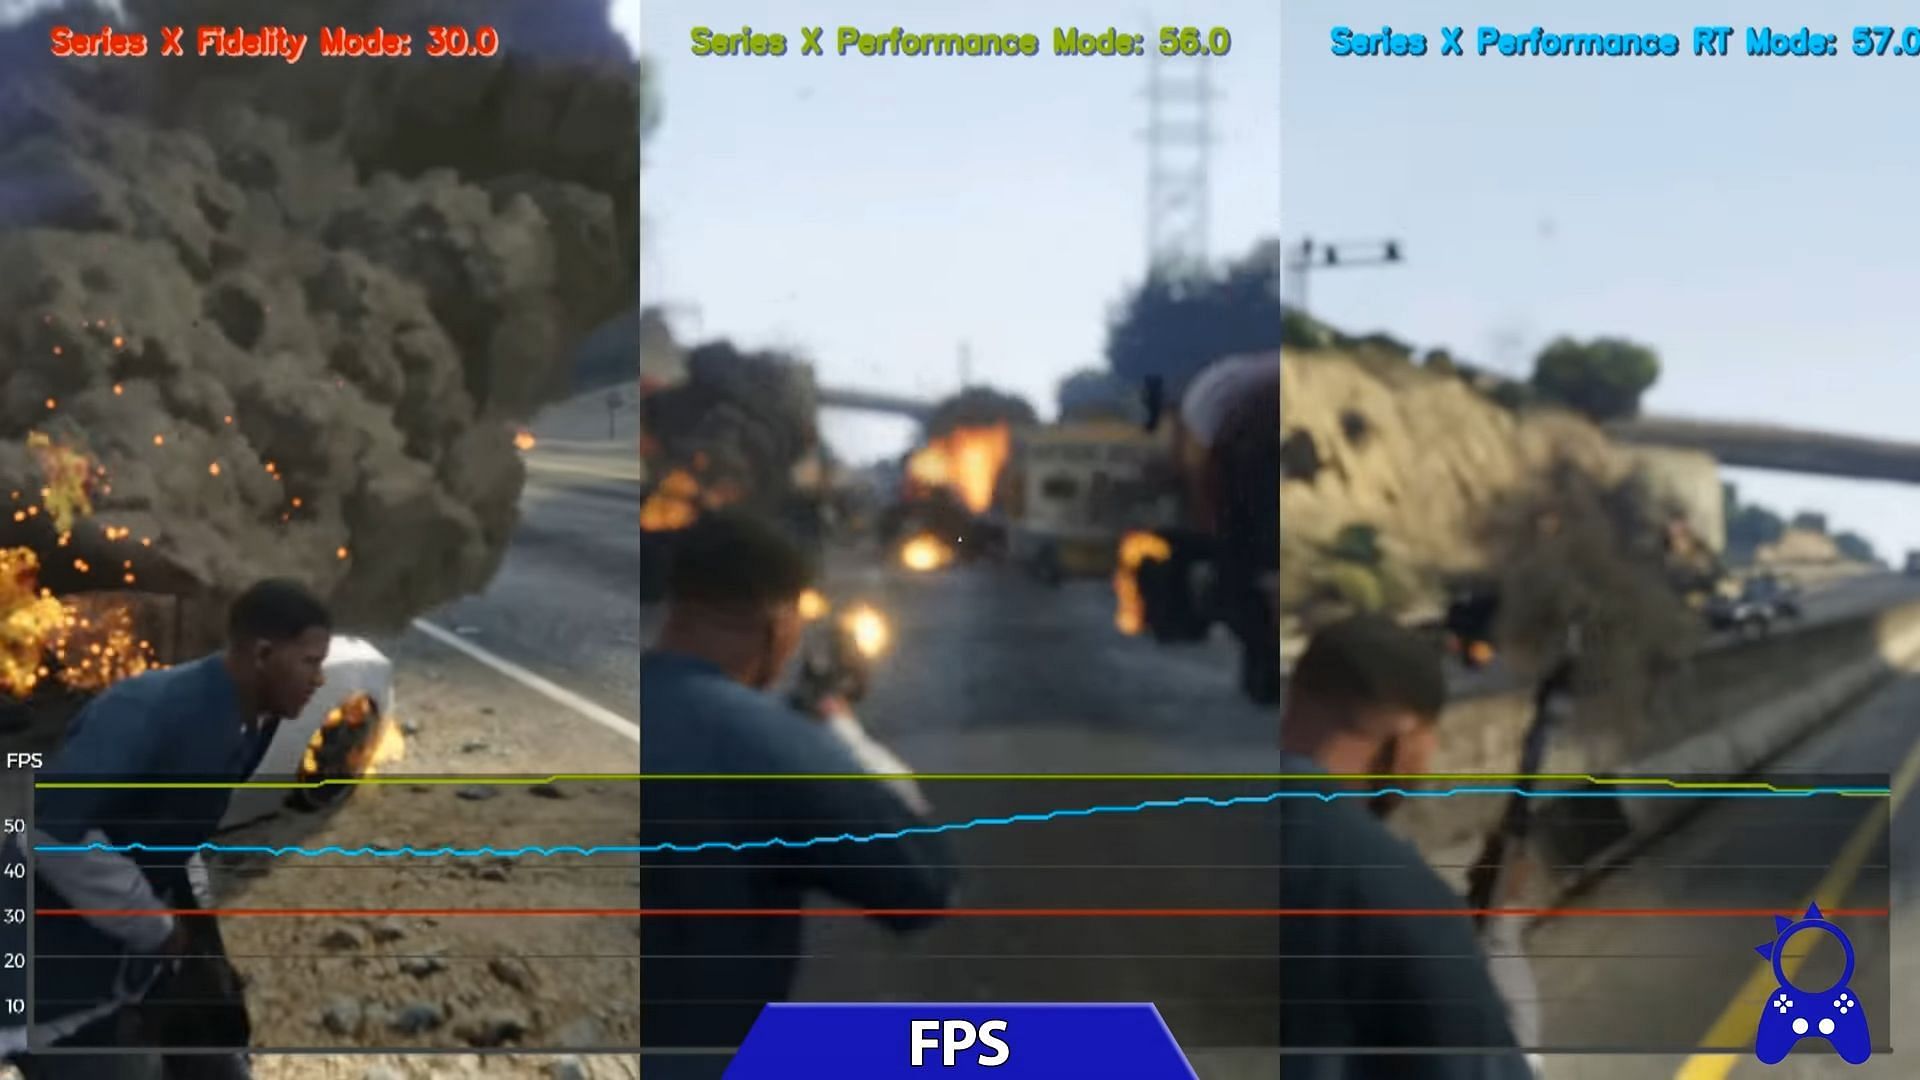 The frame rates on the Series X seems to fluctuate quite a bit (Image via Youtube/ElAnalistaDeBits)